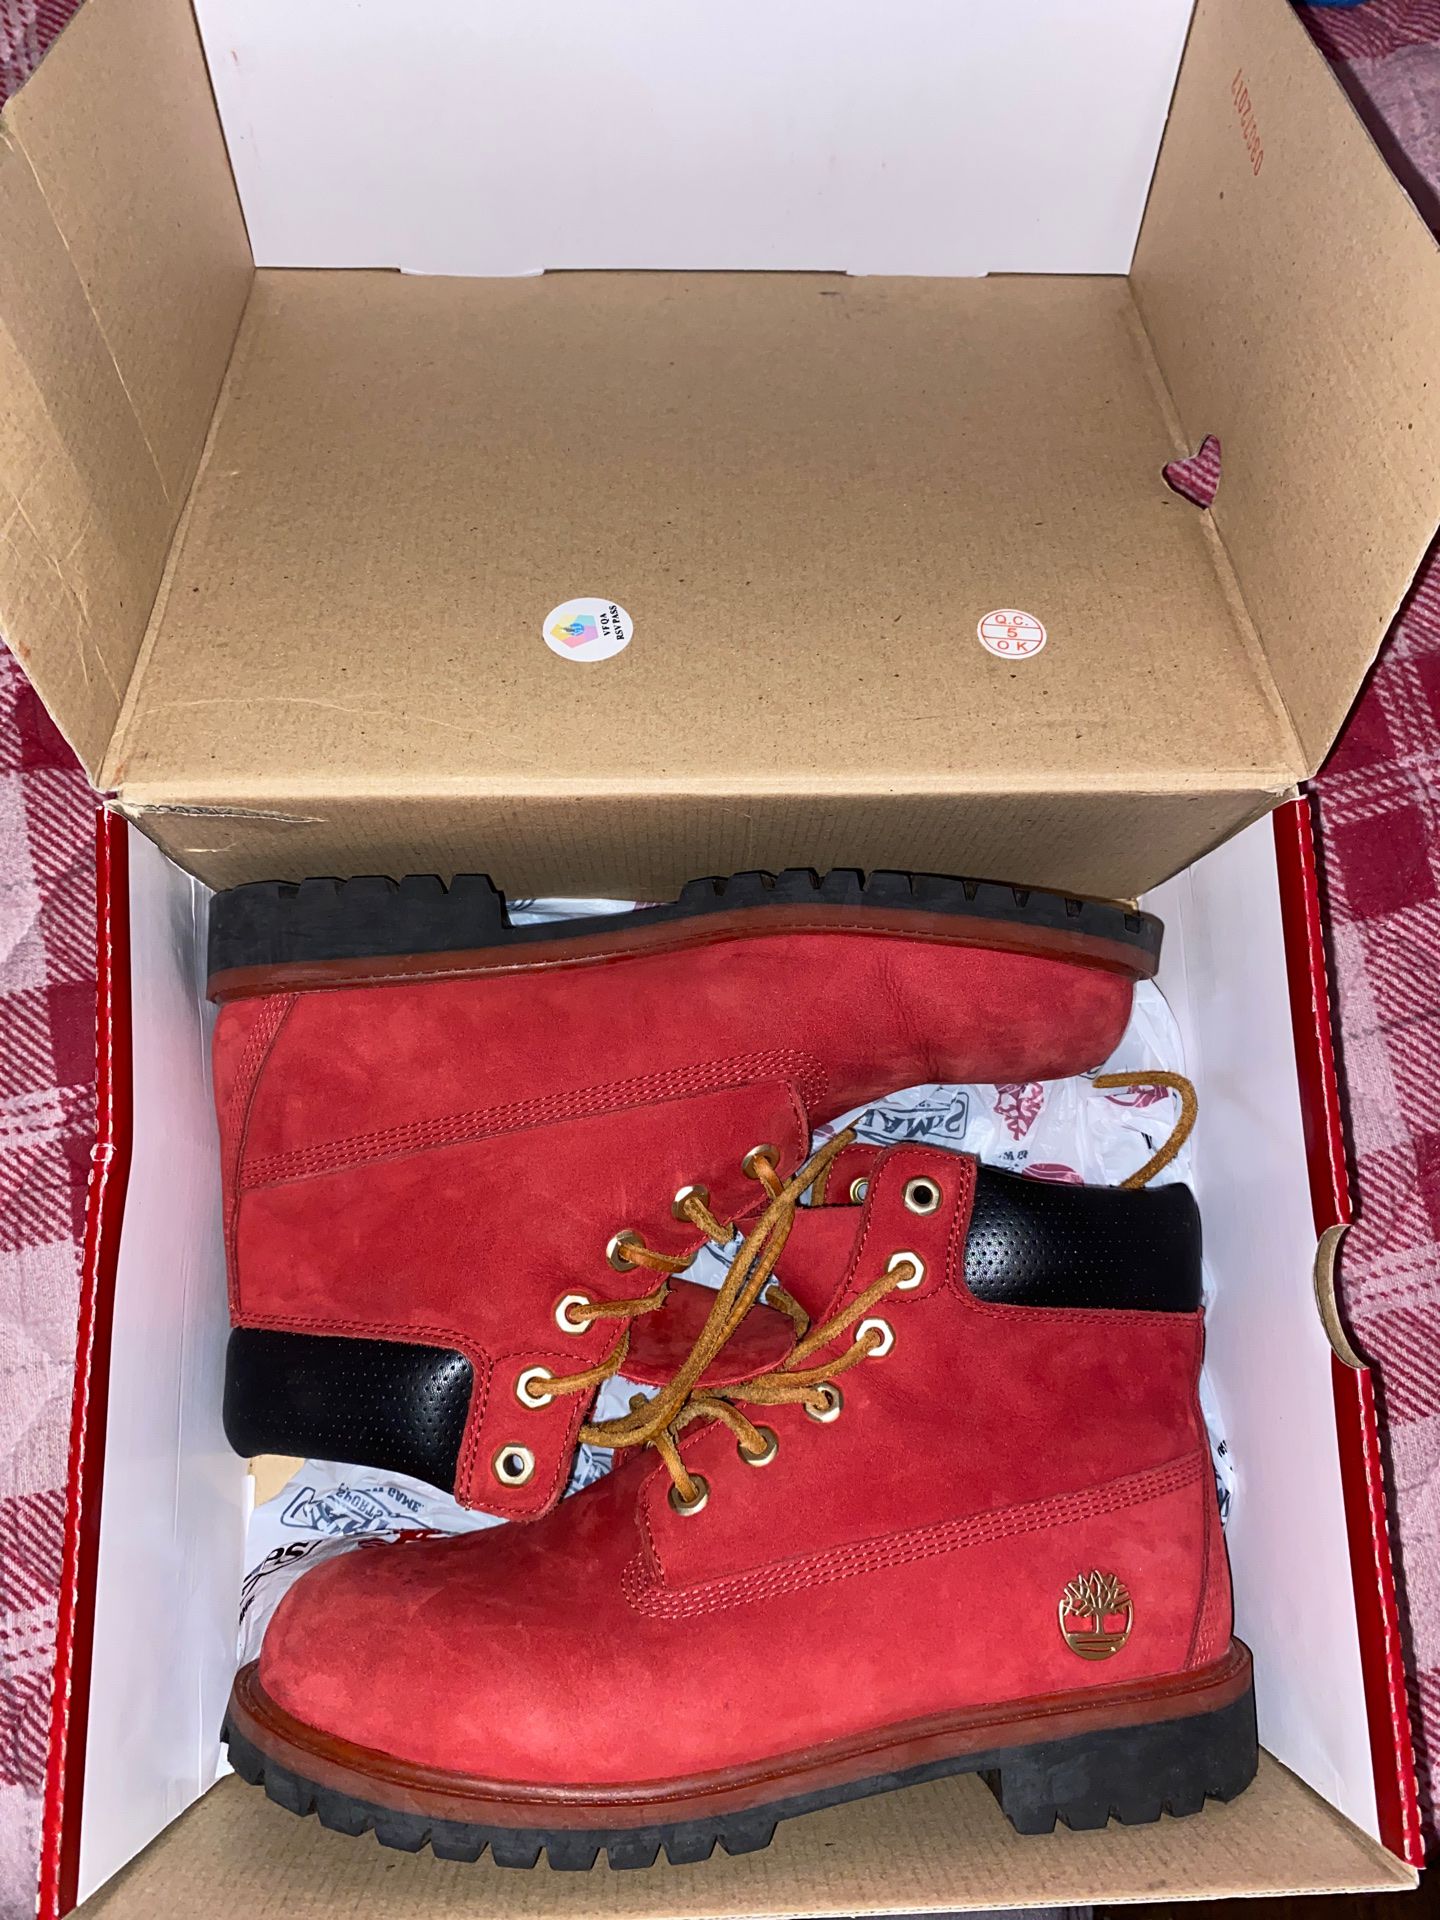 limited edition, Size 7 all red Timberlands